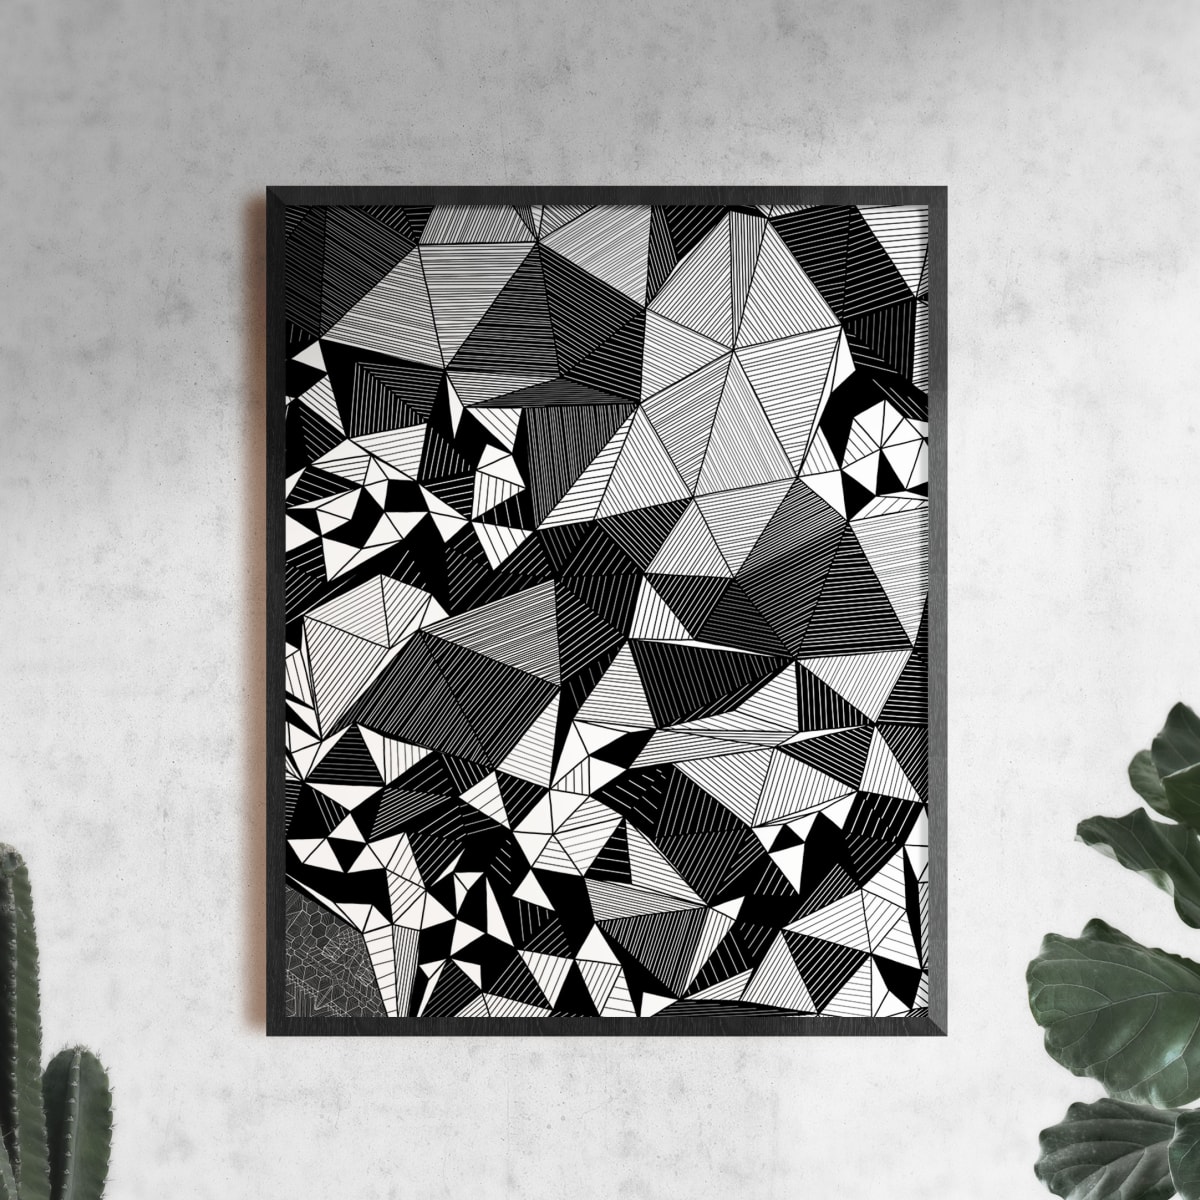 "Conscious Growth 067" Large One-of-a-Kind Print by Debbie Clapper  Image: Conscious Growth Print 067, a black and white one of a kind archival modern art print